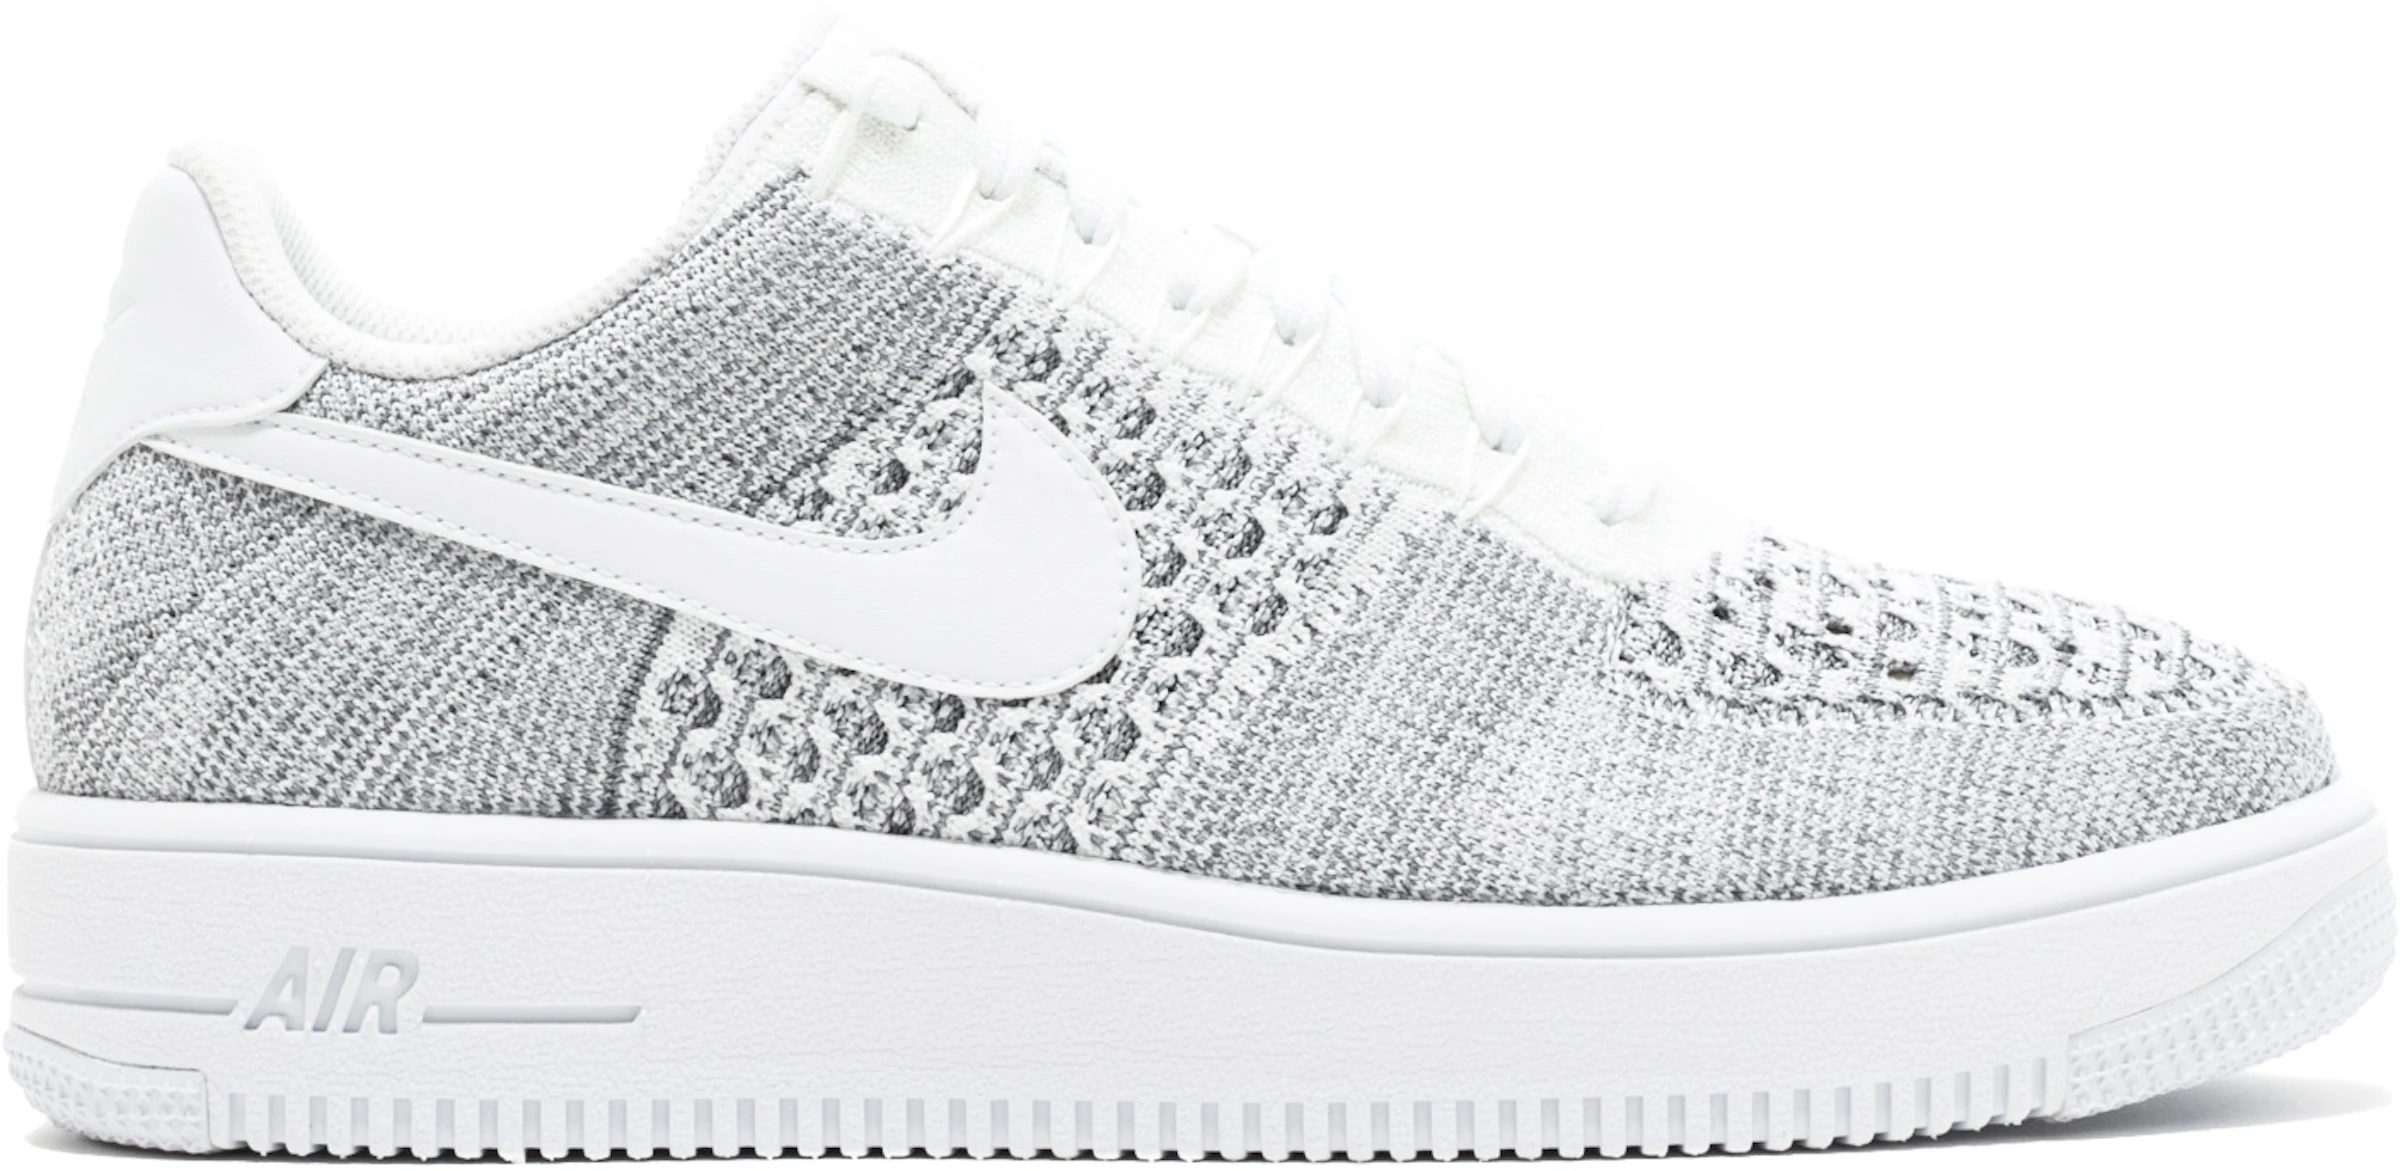 Air Force 1 Low Flyknit Cool Grey - 817419-006 - US